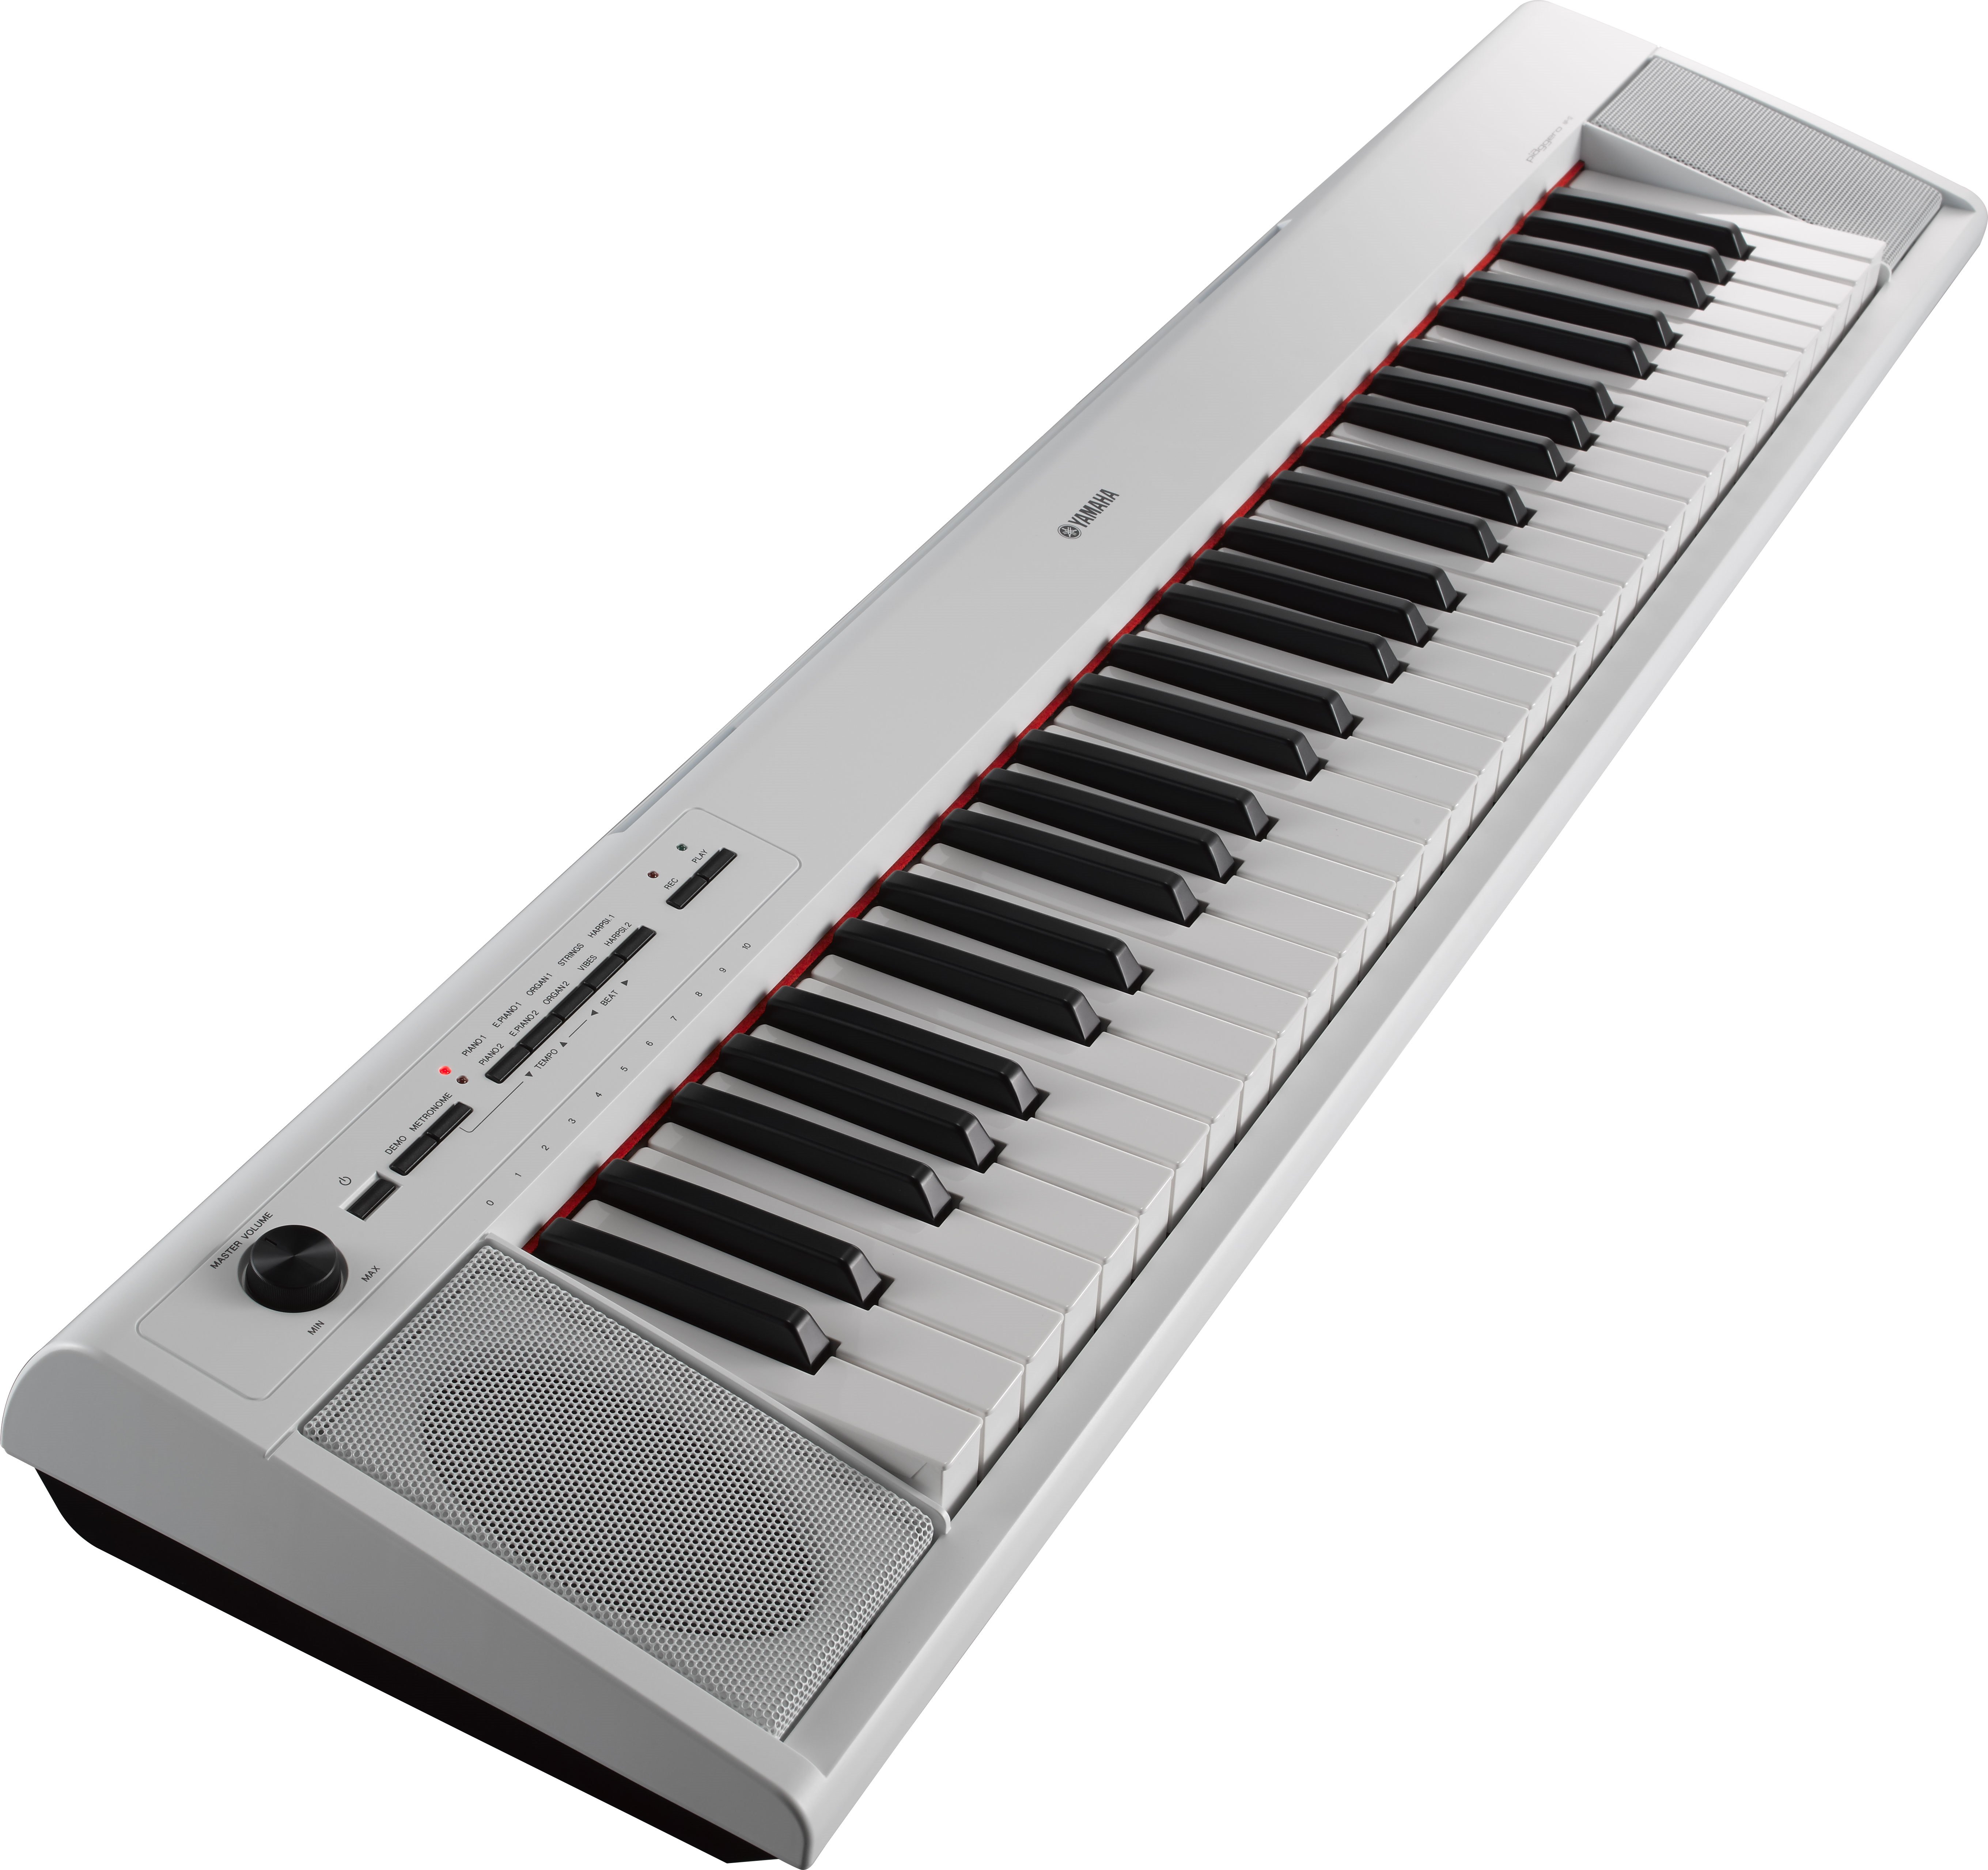 NP-32/12 - Overview - Piaggero - Keyboard Instruments - Musical Instruments  - Products - Yamaha USA